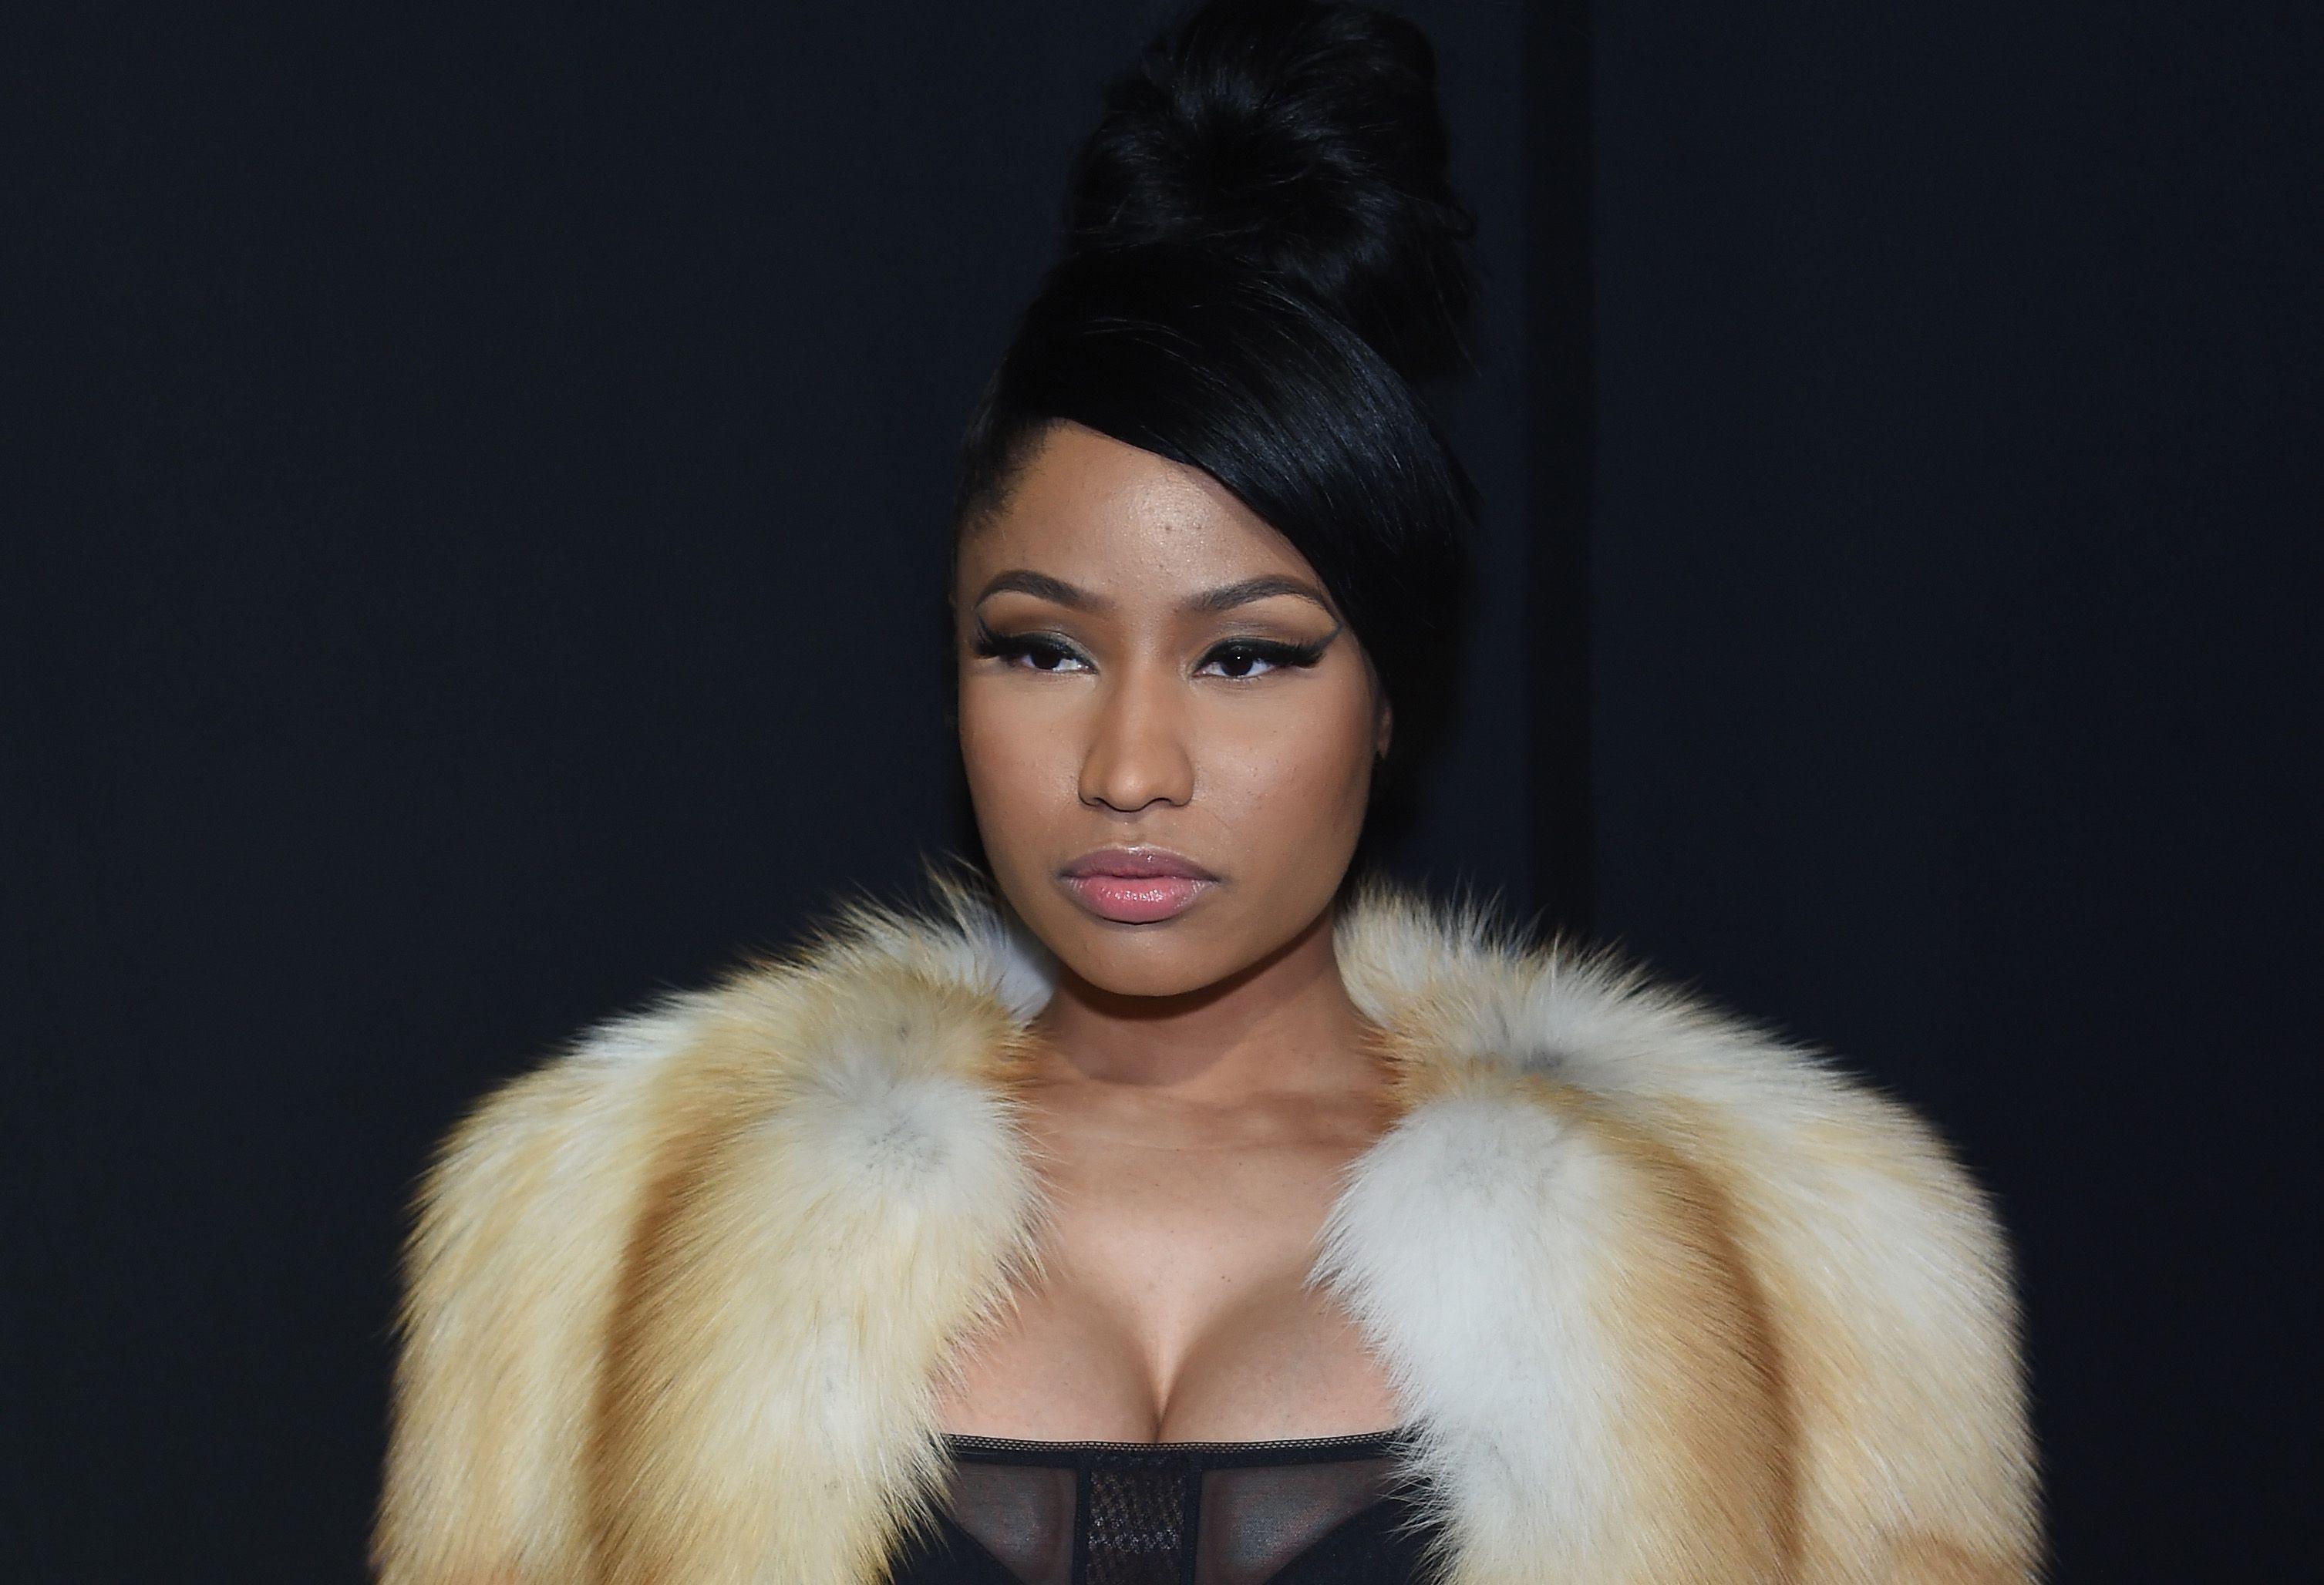 With Her New LP, Nicki Minaj Continues To Prove She's The 'Queen' Of Rap